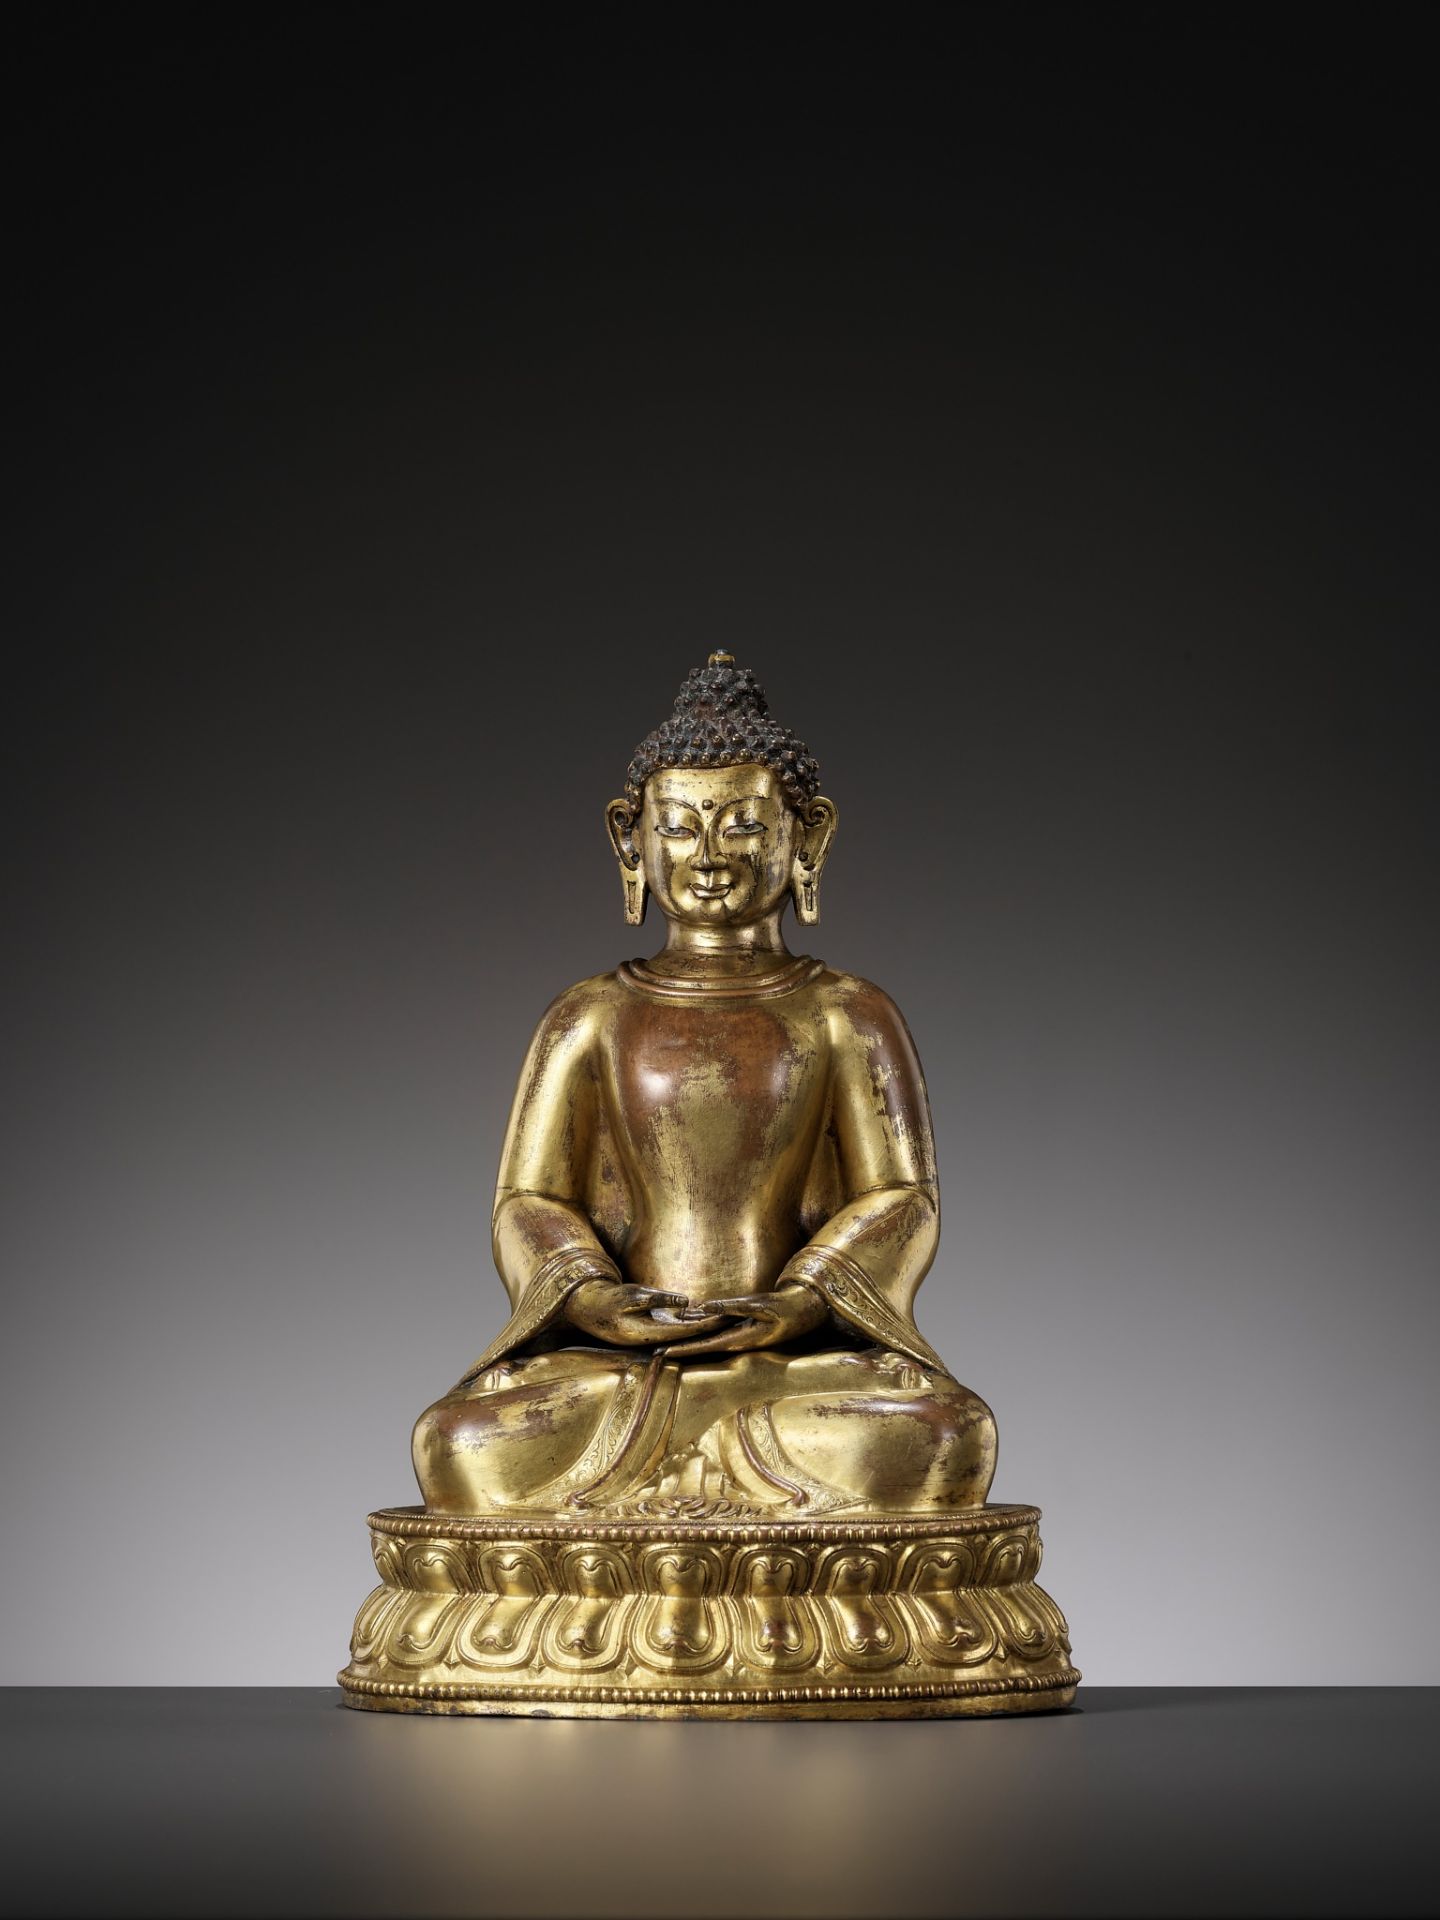 A GILT COPPER-ALLOY REPOUSSE FIGURE OF BUDDHA AMITABHA, WITH AN INSCRIPTION REFERRING TO THE SECOND - Image 2 of 16